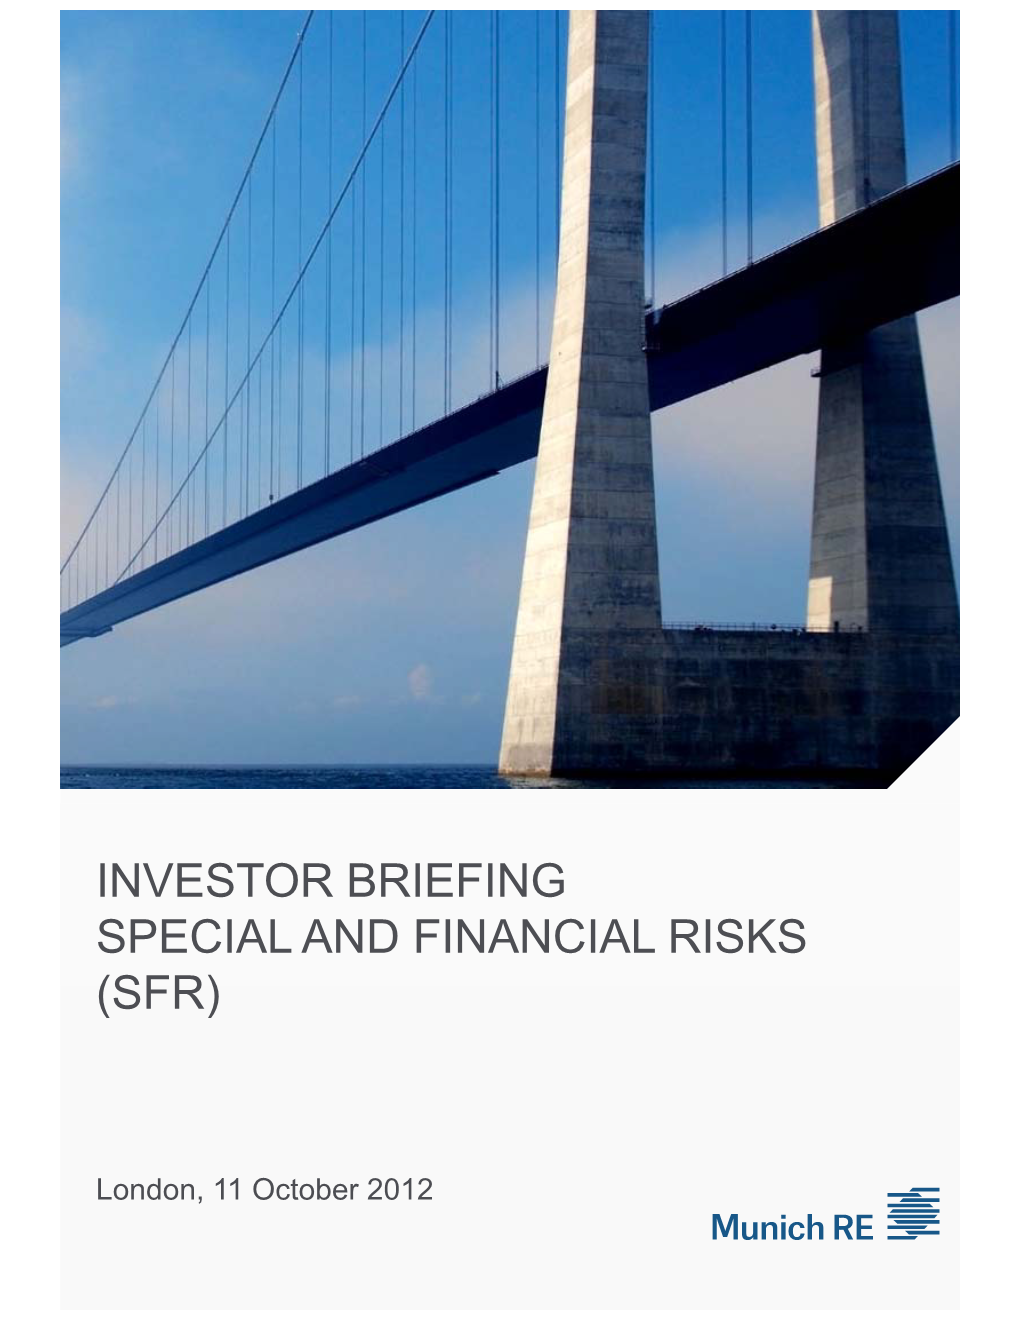 Investor Briefing Special and Financial Risks (Sfr)